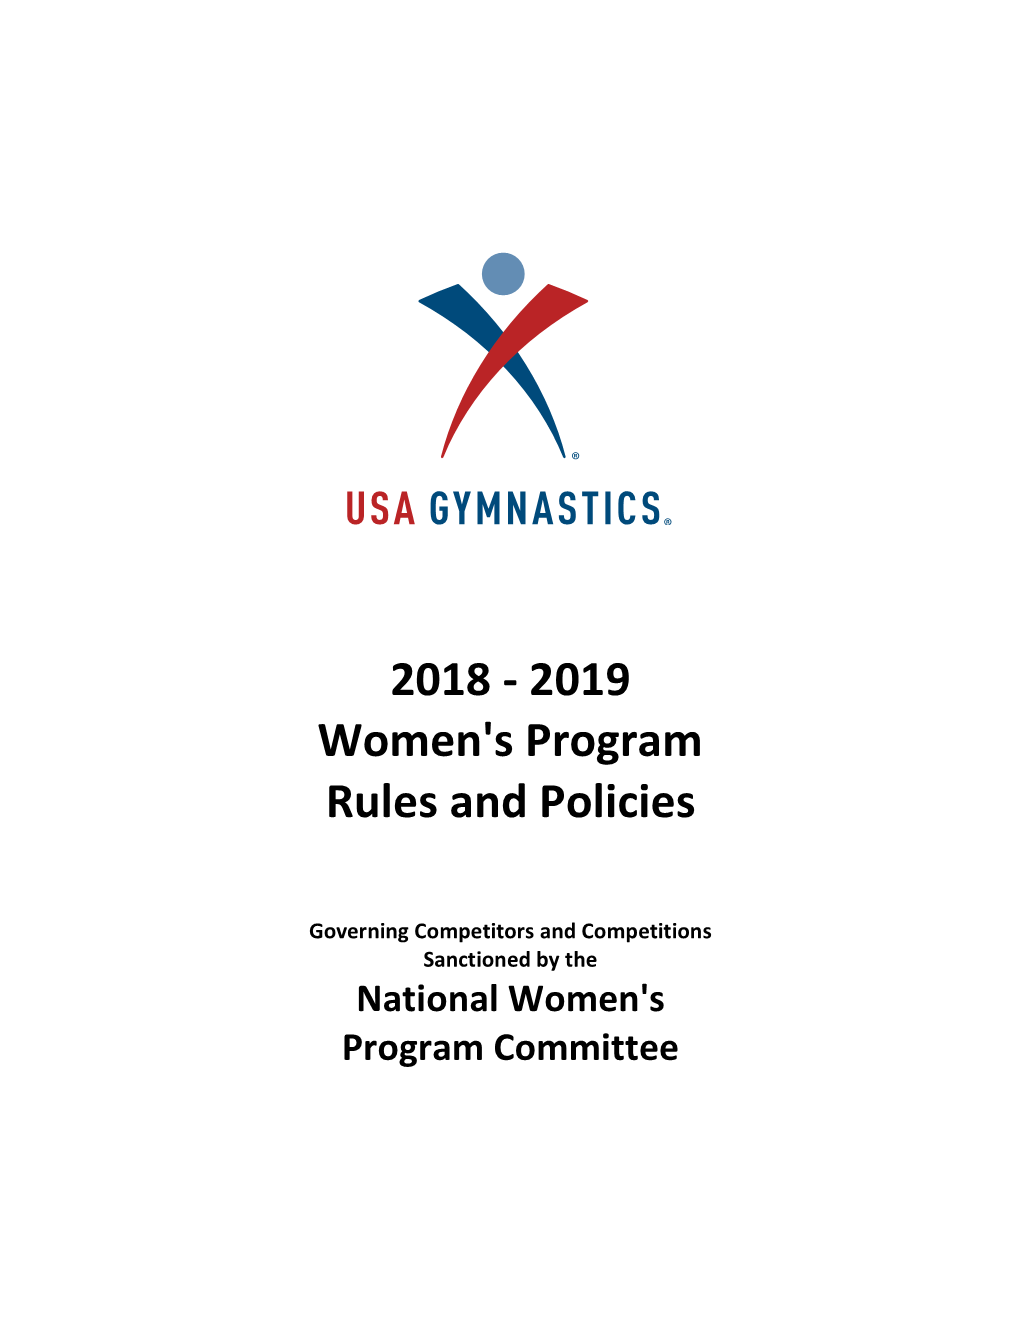 2018 - 2019 Women's Program Rules and Policies